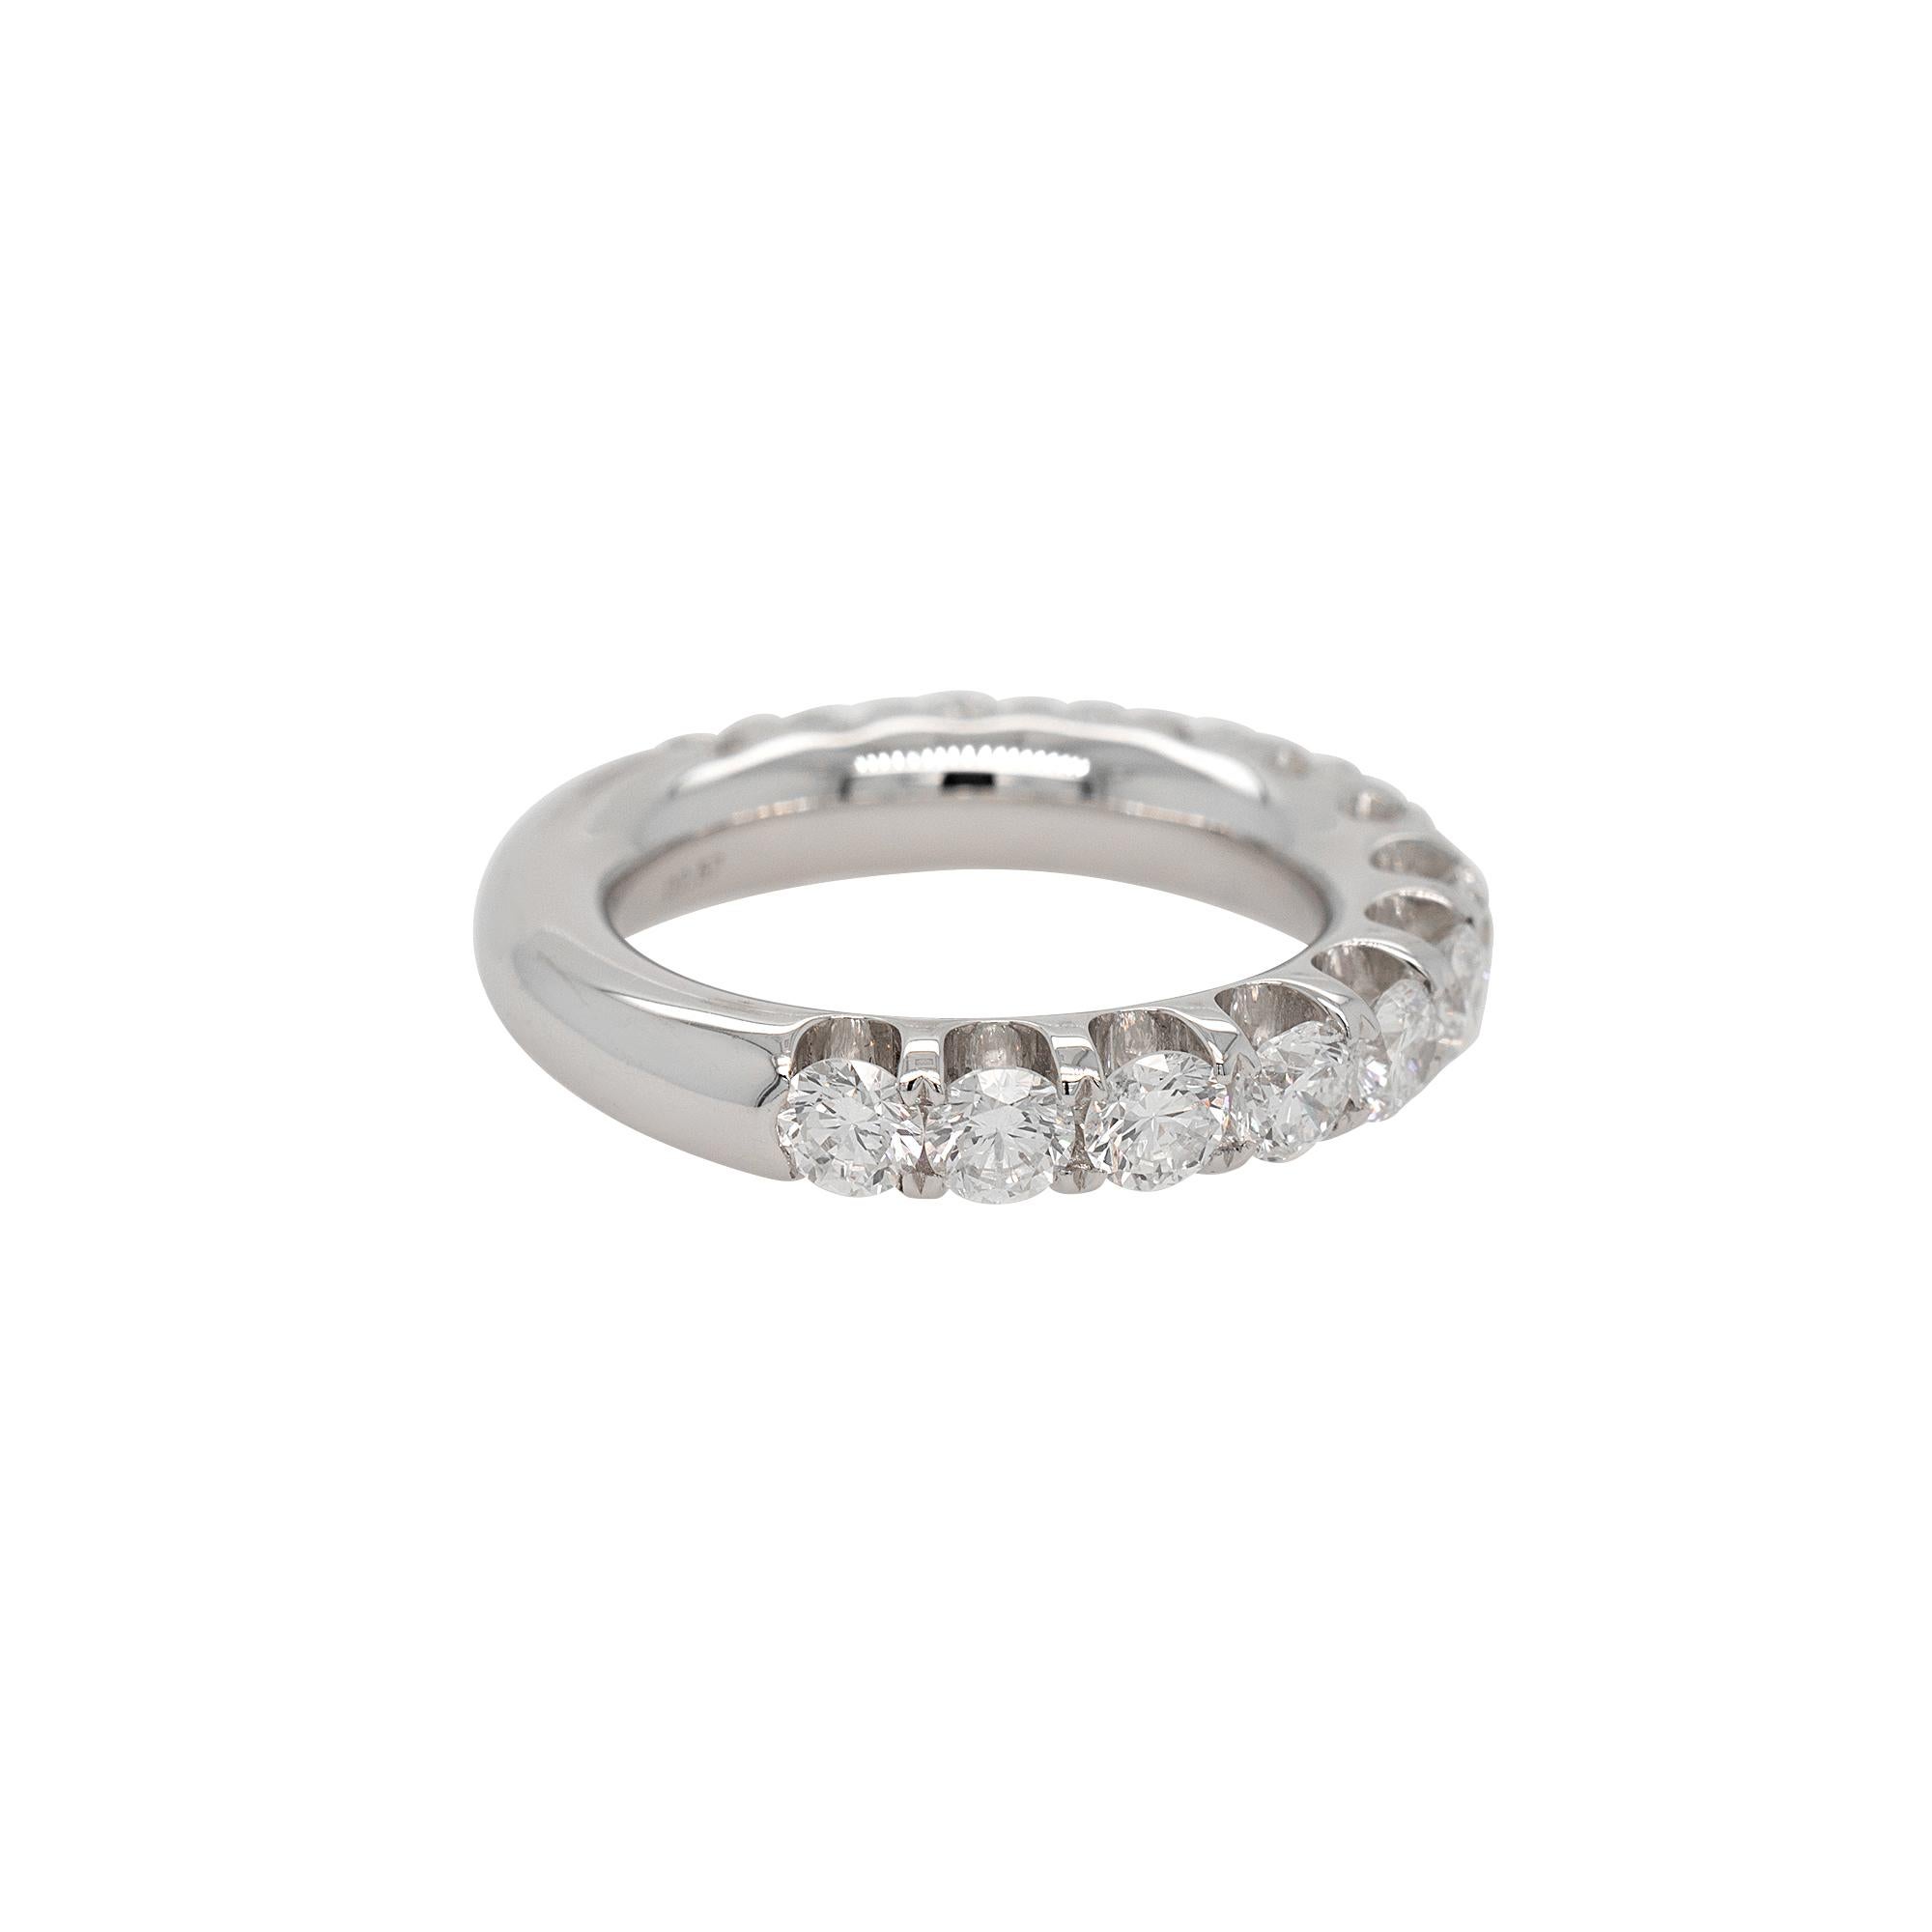 Diamond Details: 
2.57ct Round Brilliant Natural Diamond
G Color VS Clarity
Ring Material: 18k White Gold
Ring Size: 6.25 (can be sized)
Total Weight: 8.3g (5.3dwt)
This item comes with a presentation box!
SKU: A30317336

With its captivating